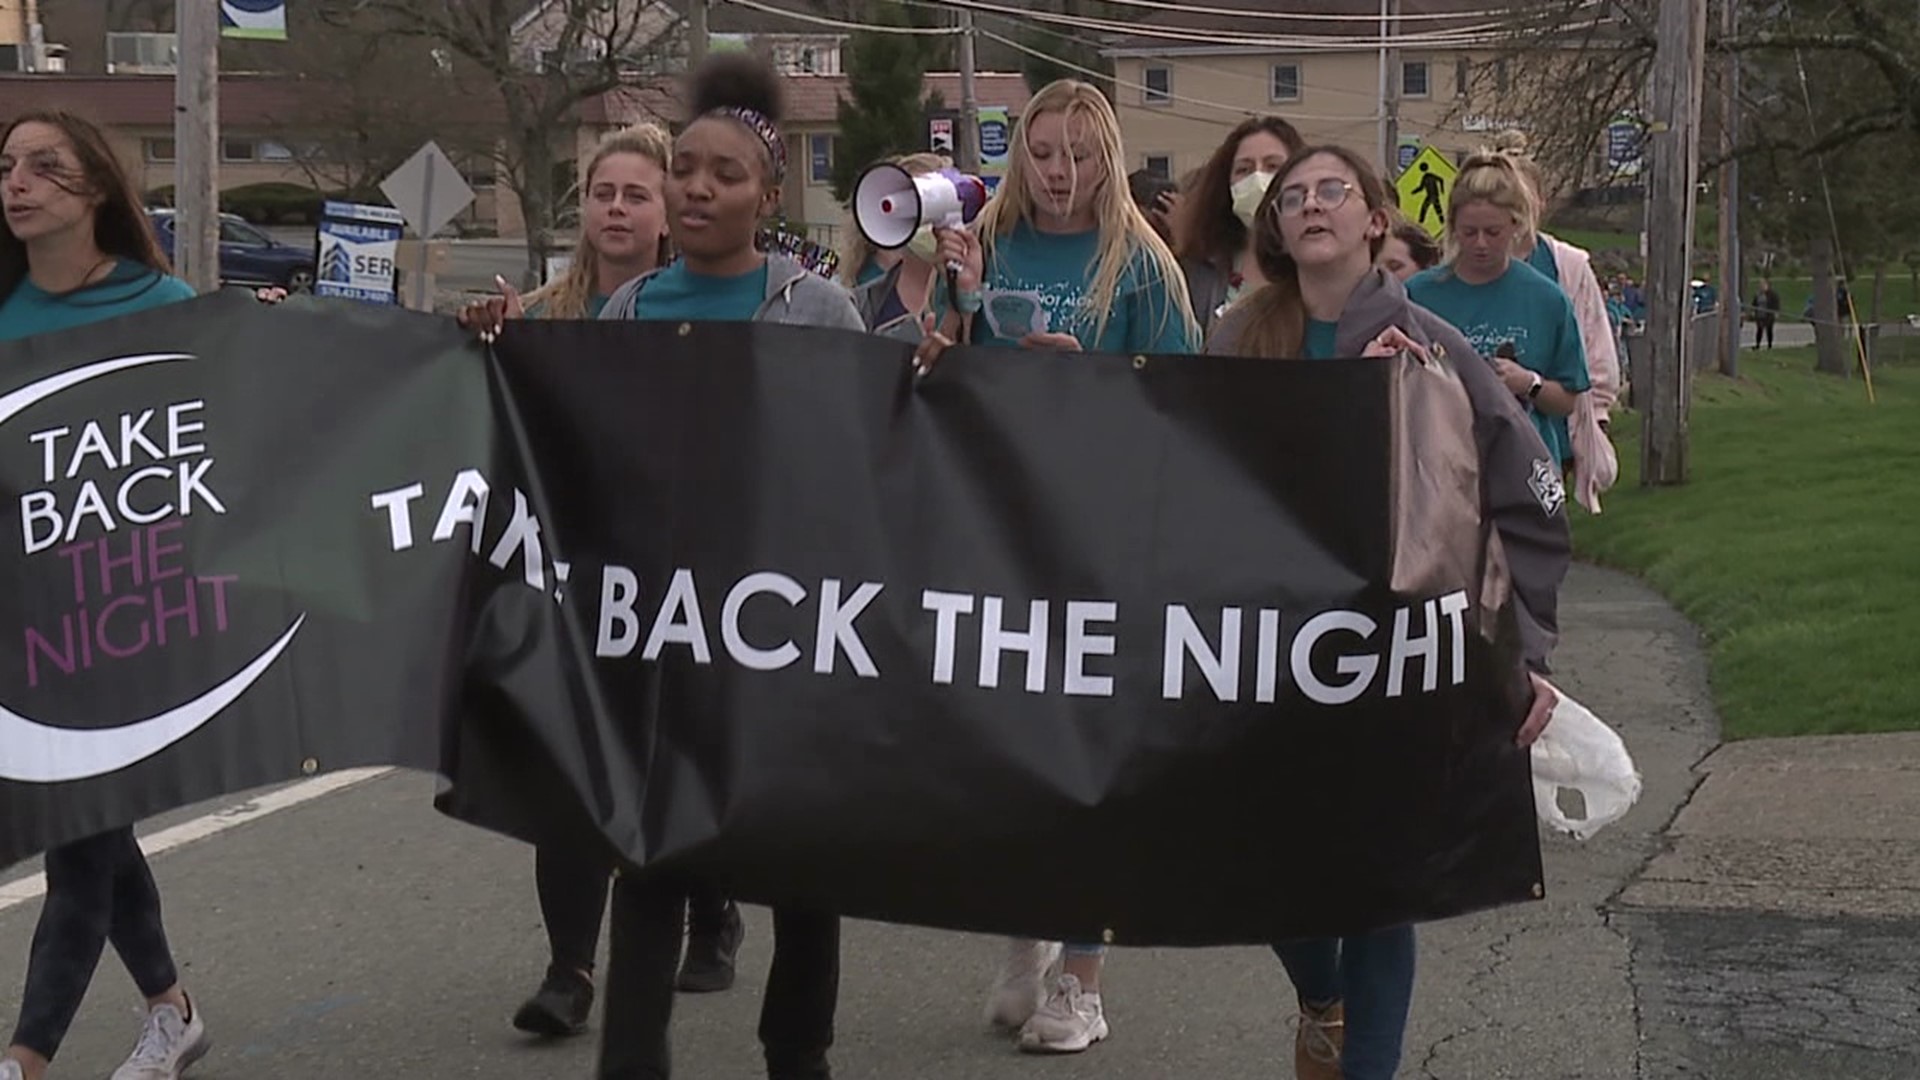 Take Back the Night Marches have been held all over the country since the 1970s.